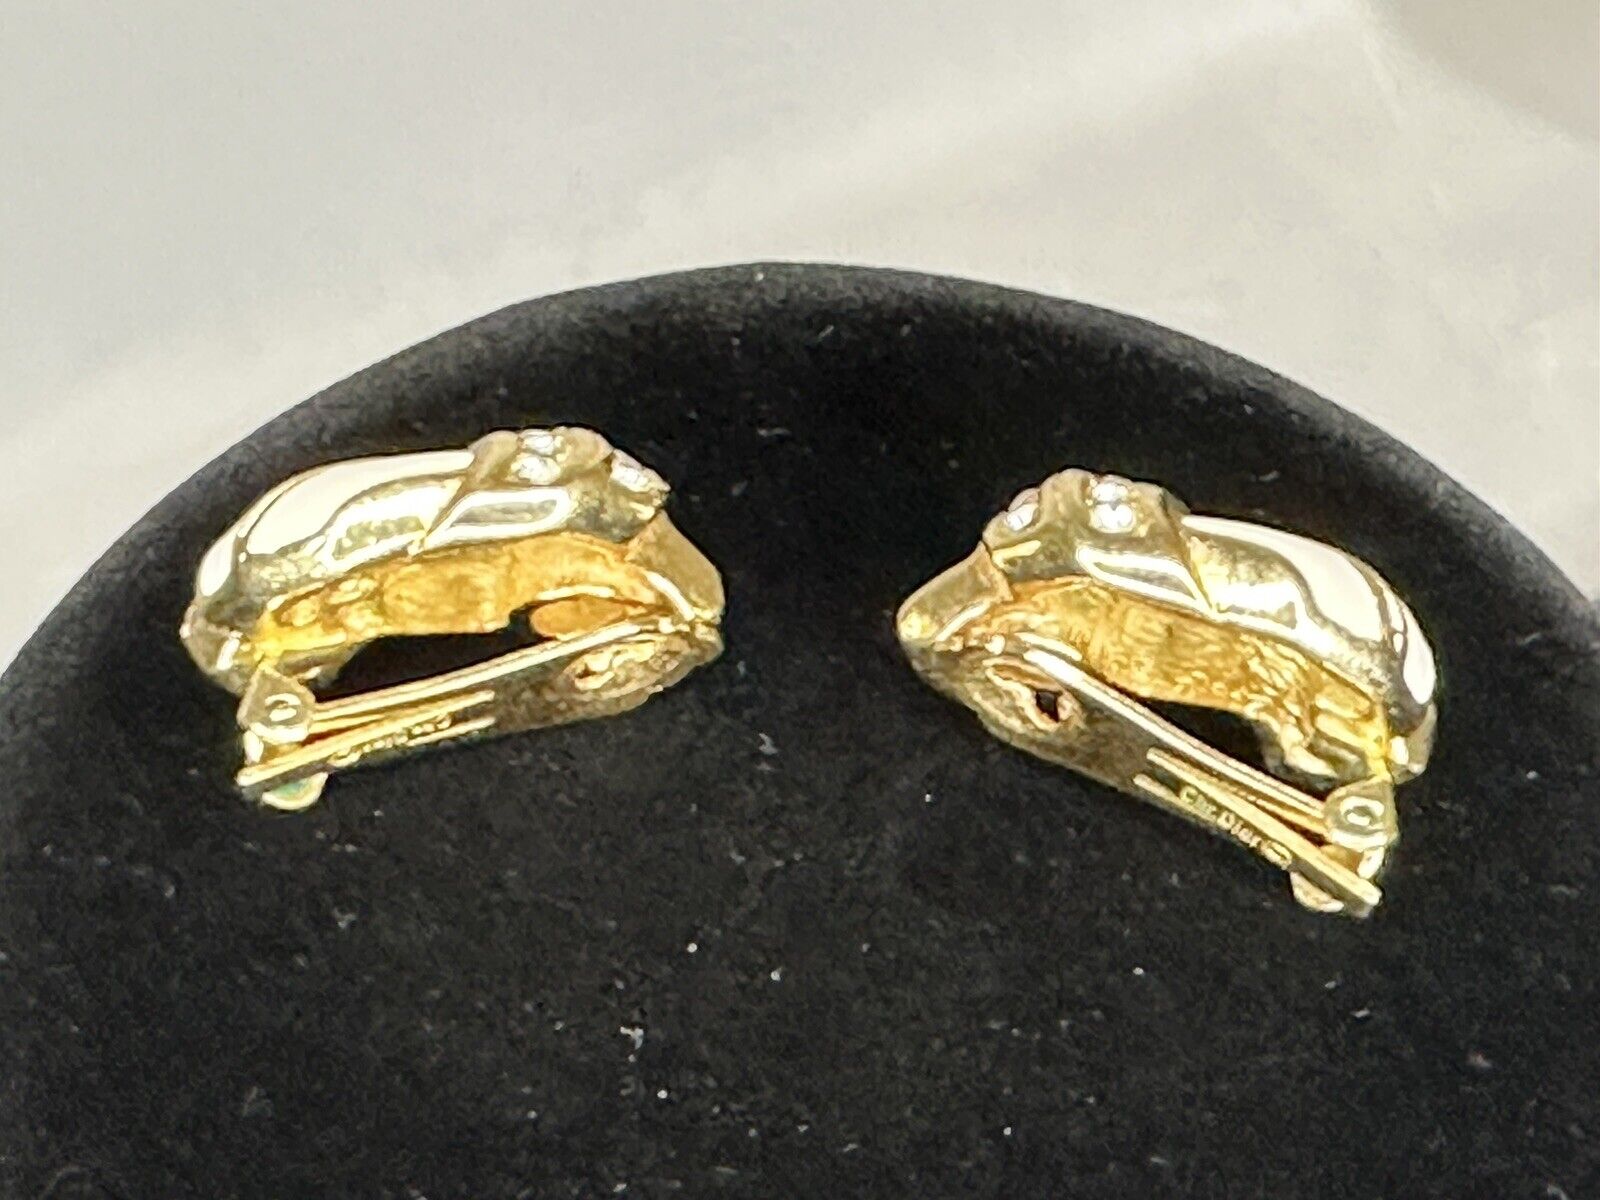 Vintage Signed Christian Dior clip on earrings - image 4